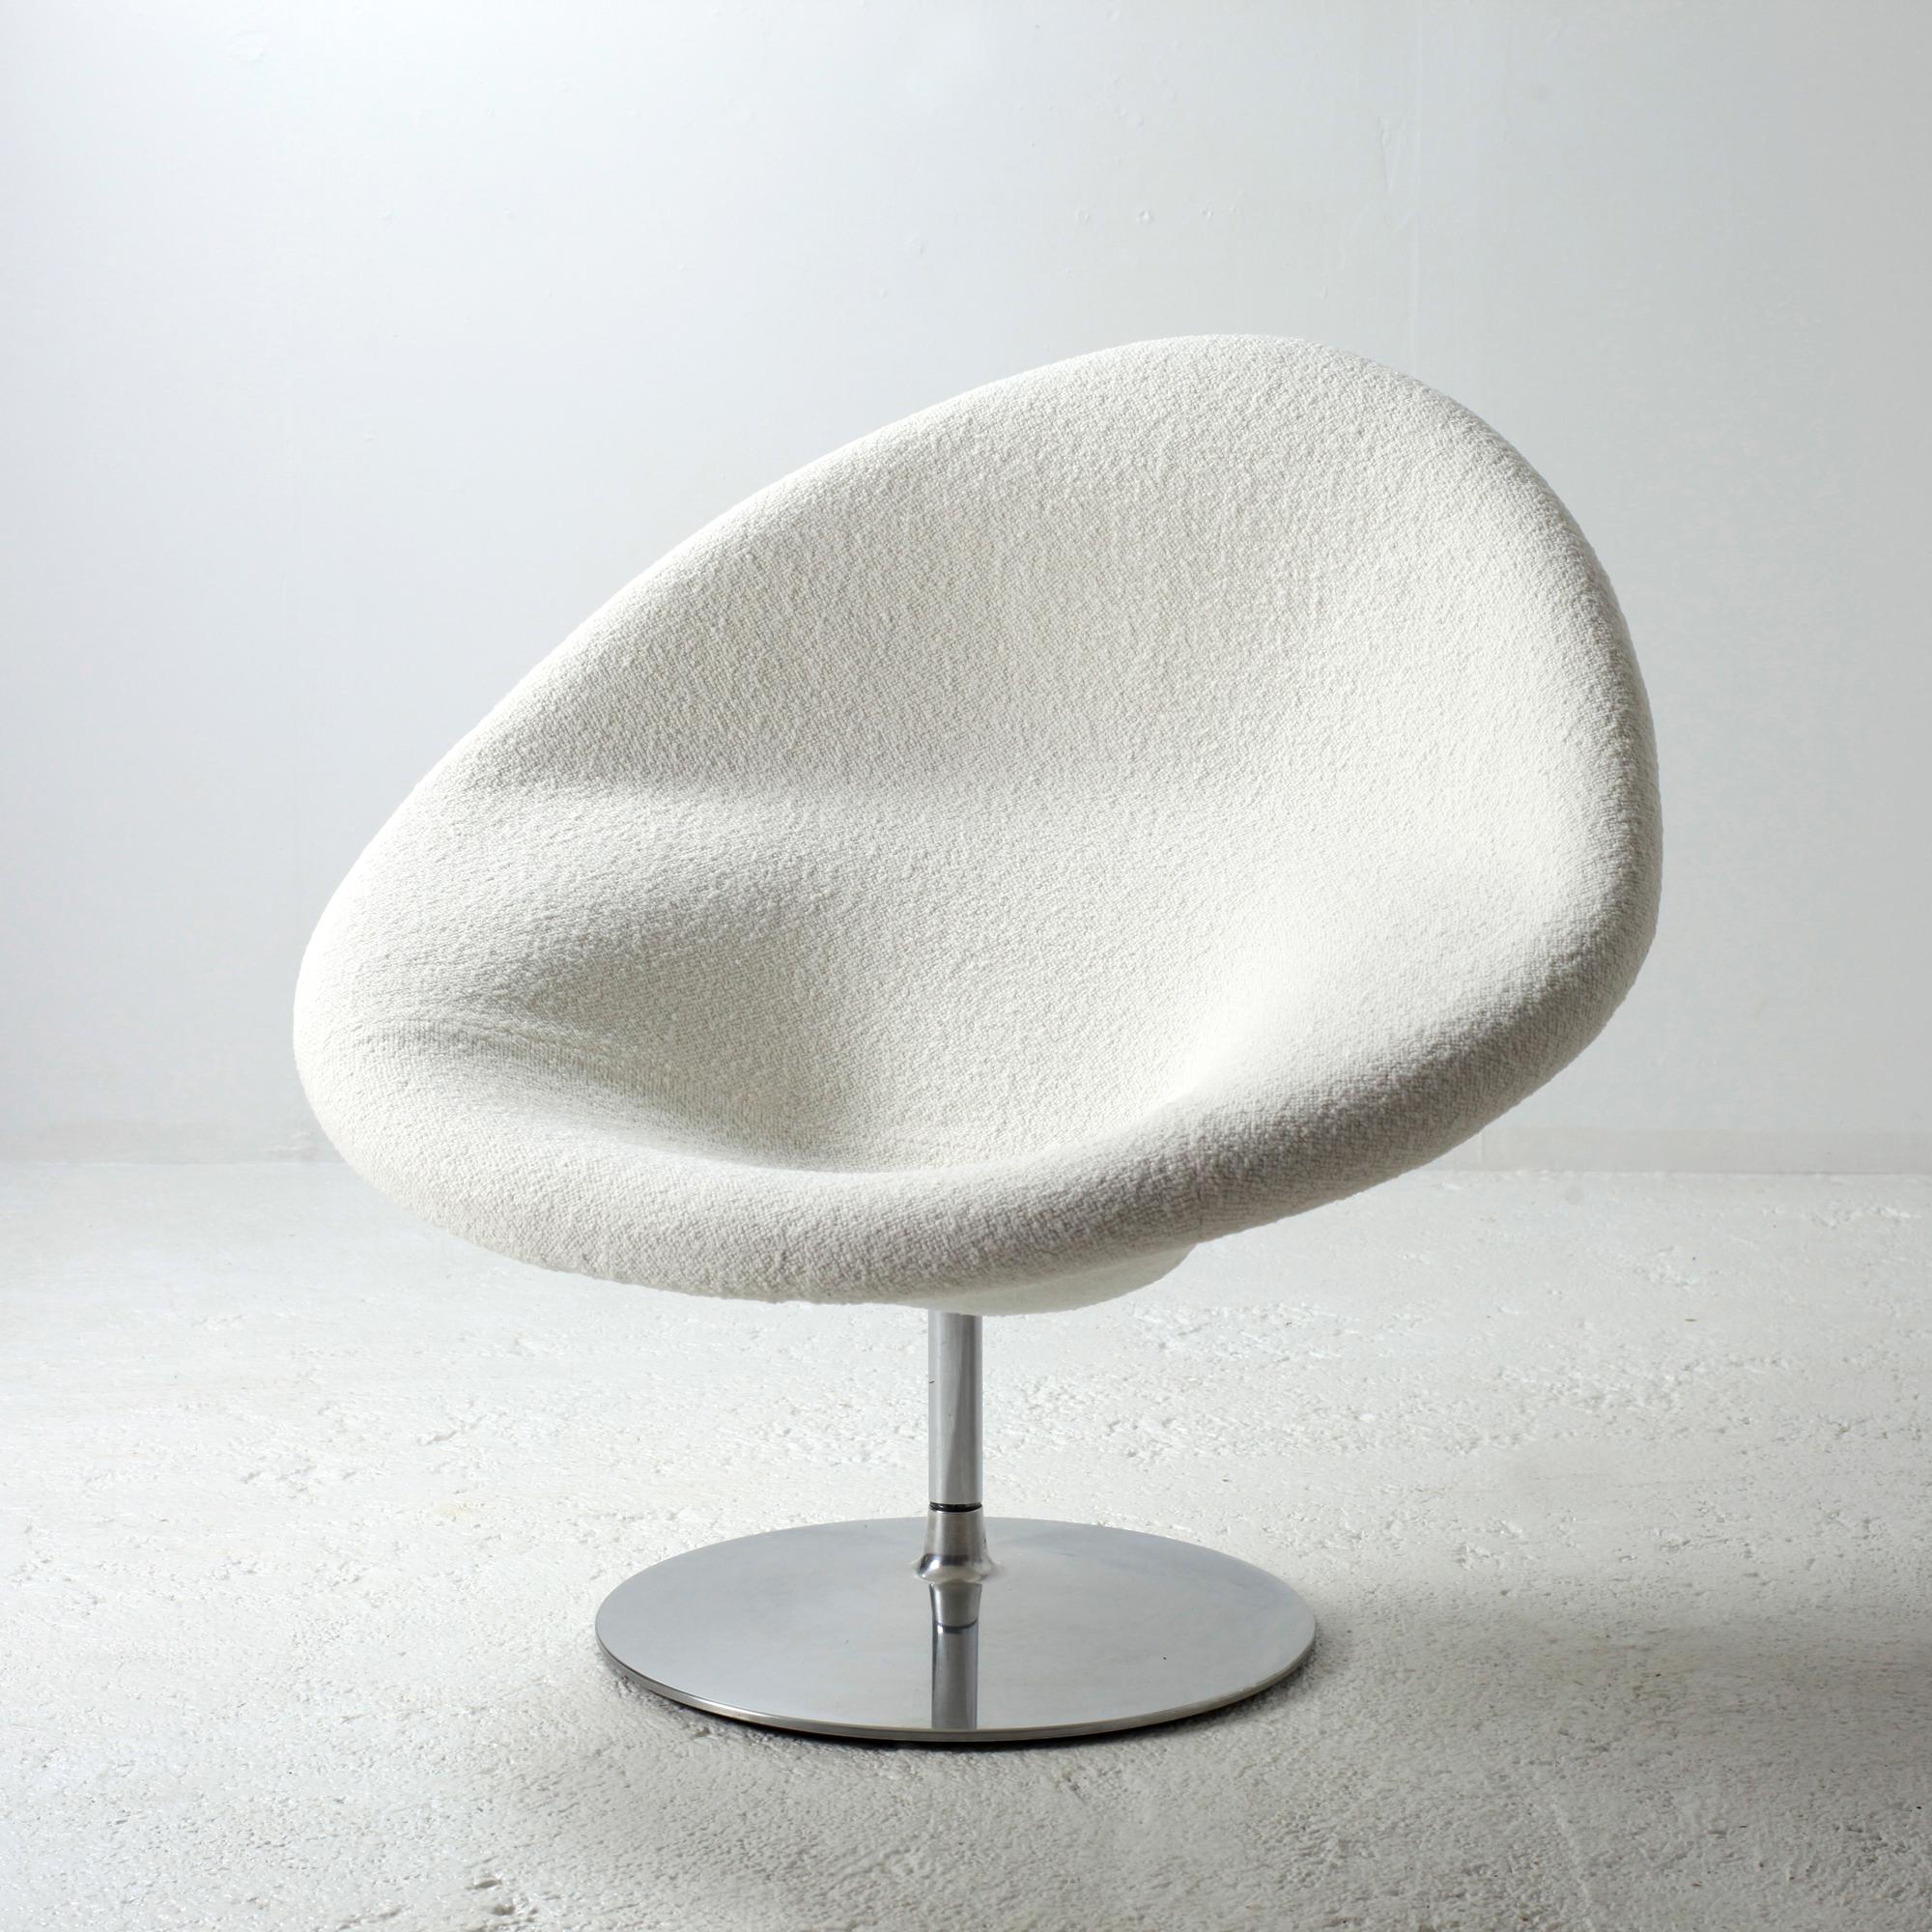 Sulptural and very comfy swivel lounge chair by Pierre Paulin model Globe.
Reupholstered in white bouclé fabric.
Designed in 1958, Pierre Paulin used these chairs  to furnish the lobby and the green room of the 